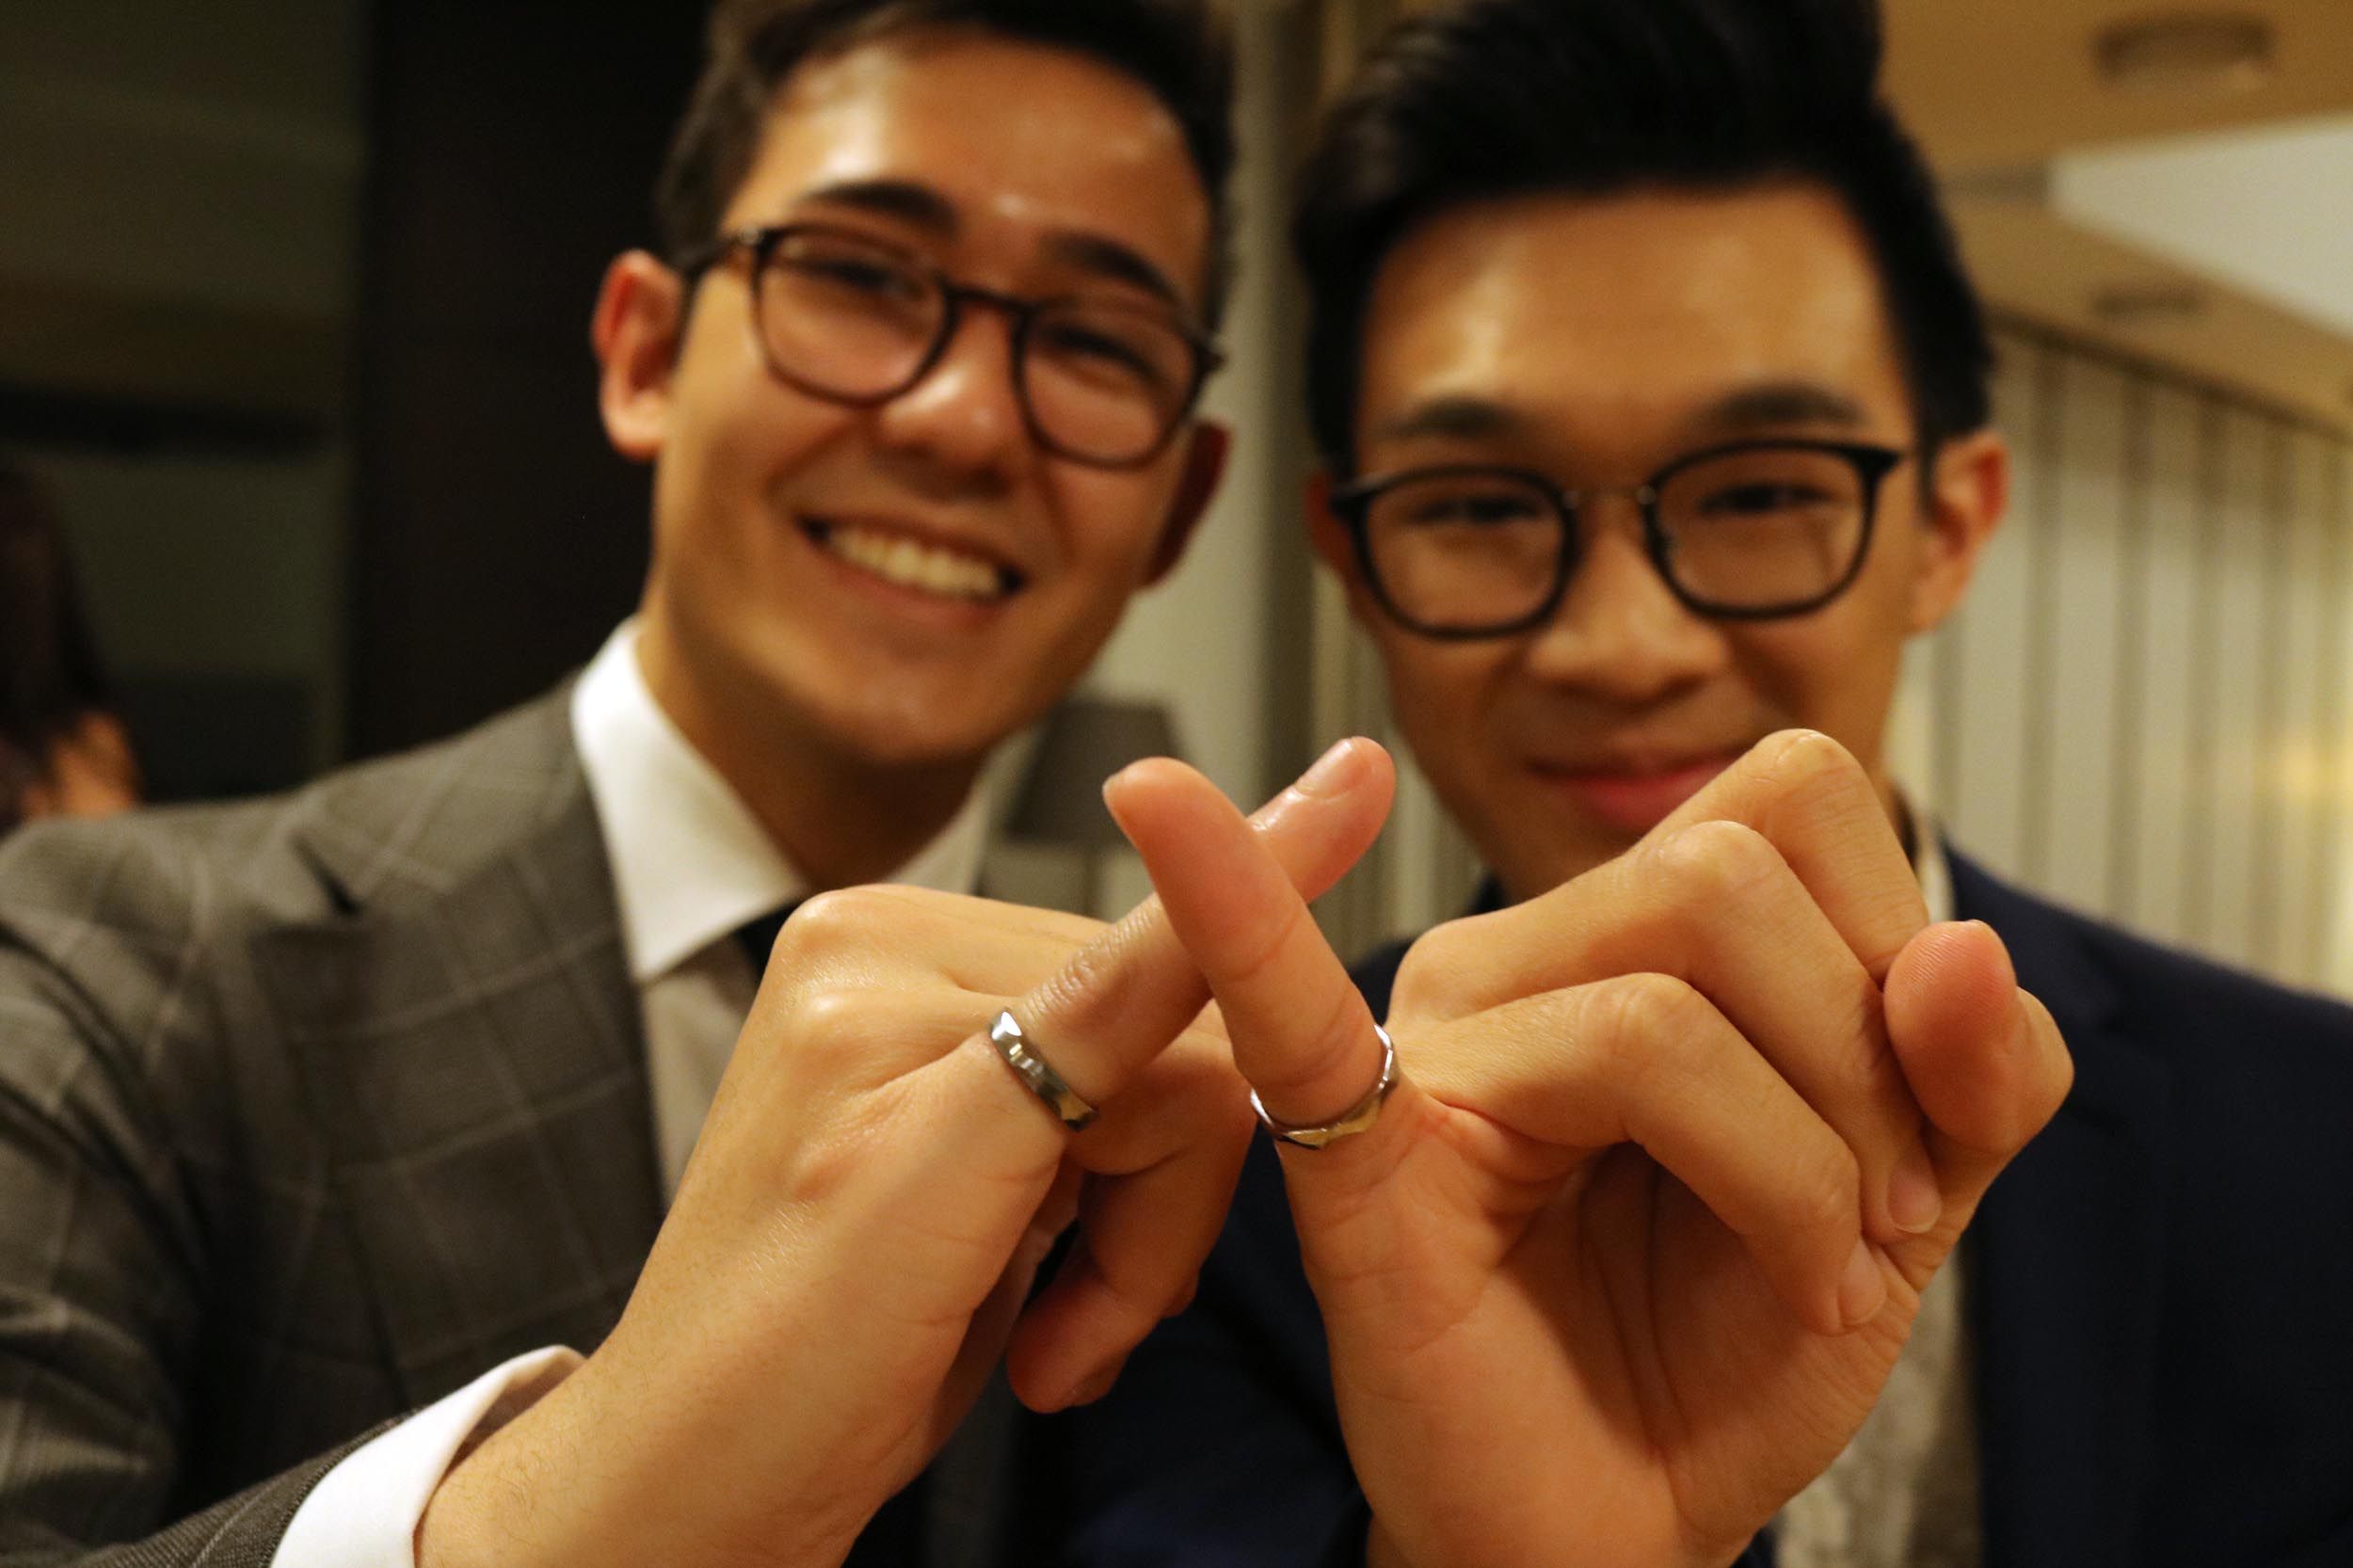 Canadian Engineering students wearing the iron ring